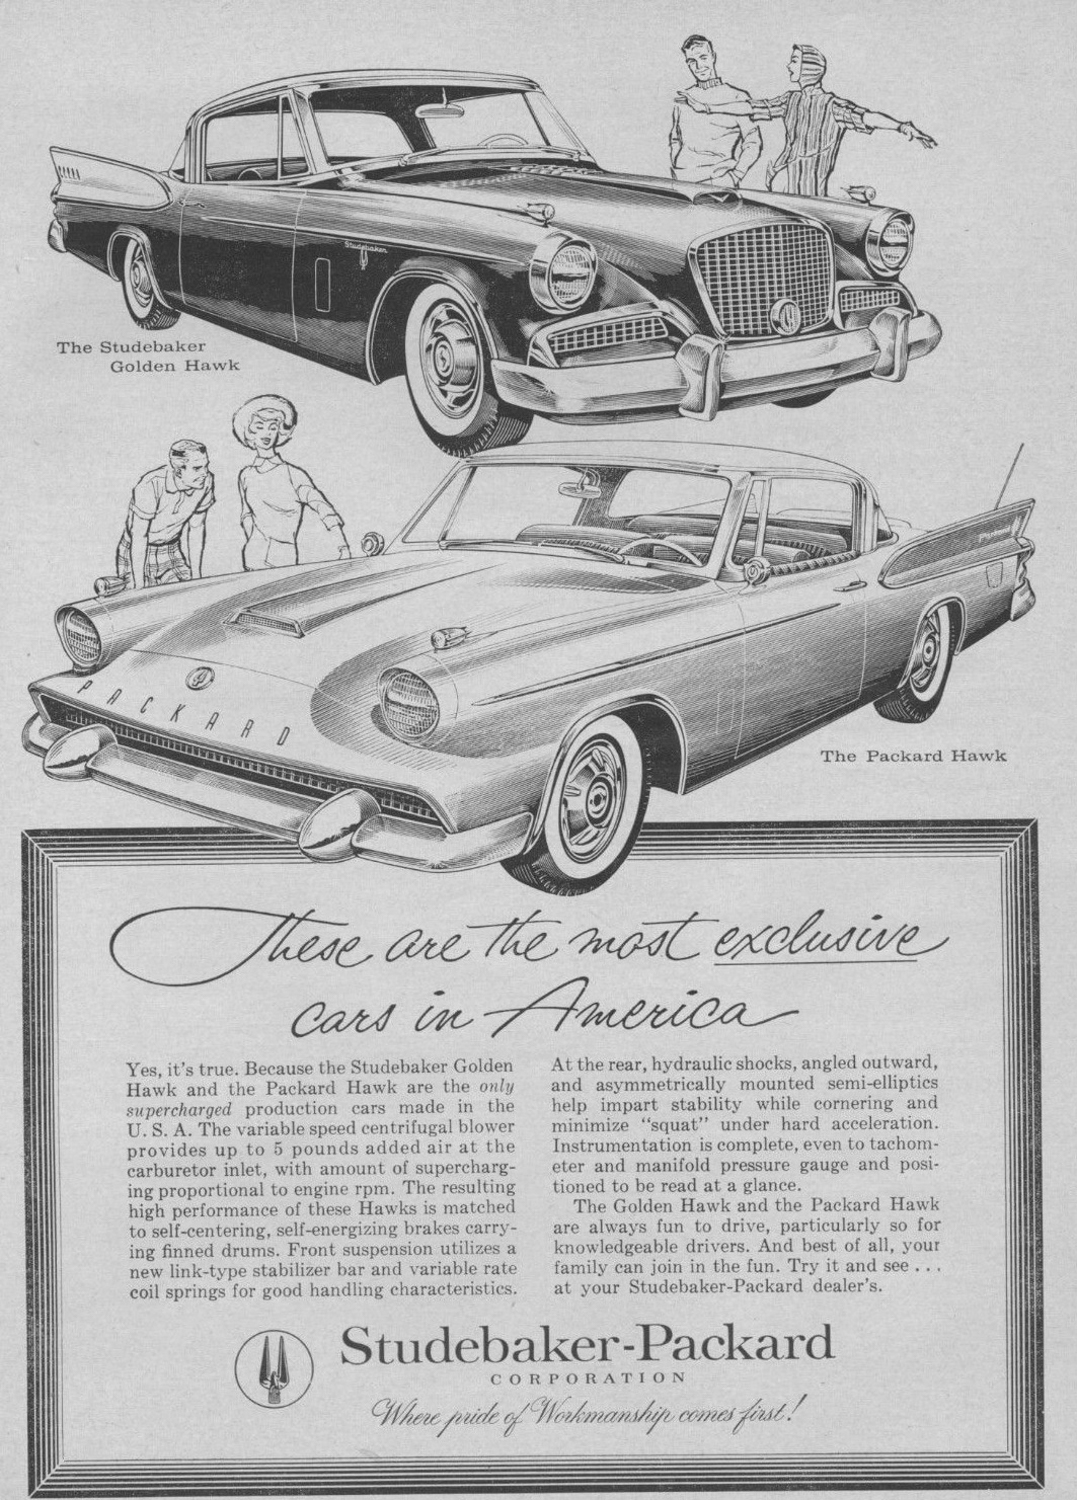 The Hawk continued to sell well in 1958, but the redesign of the Packard effectively killed the marque. 